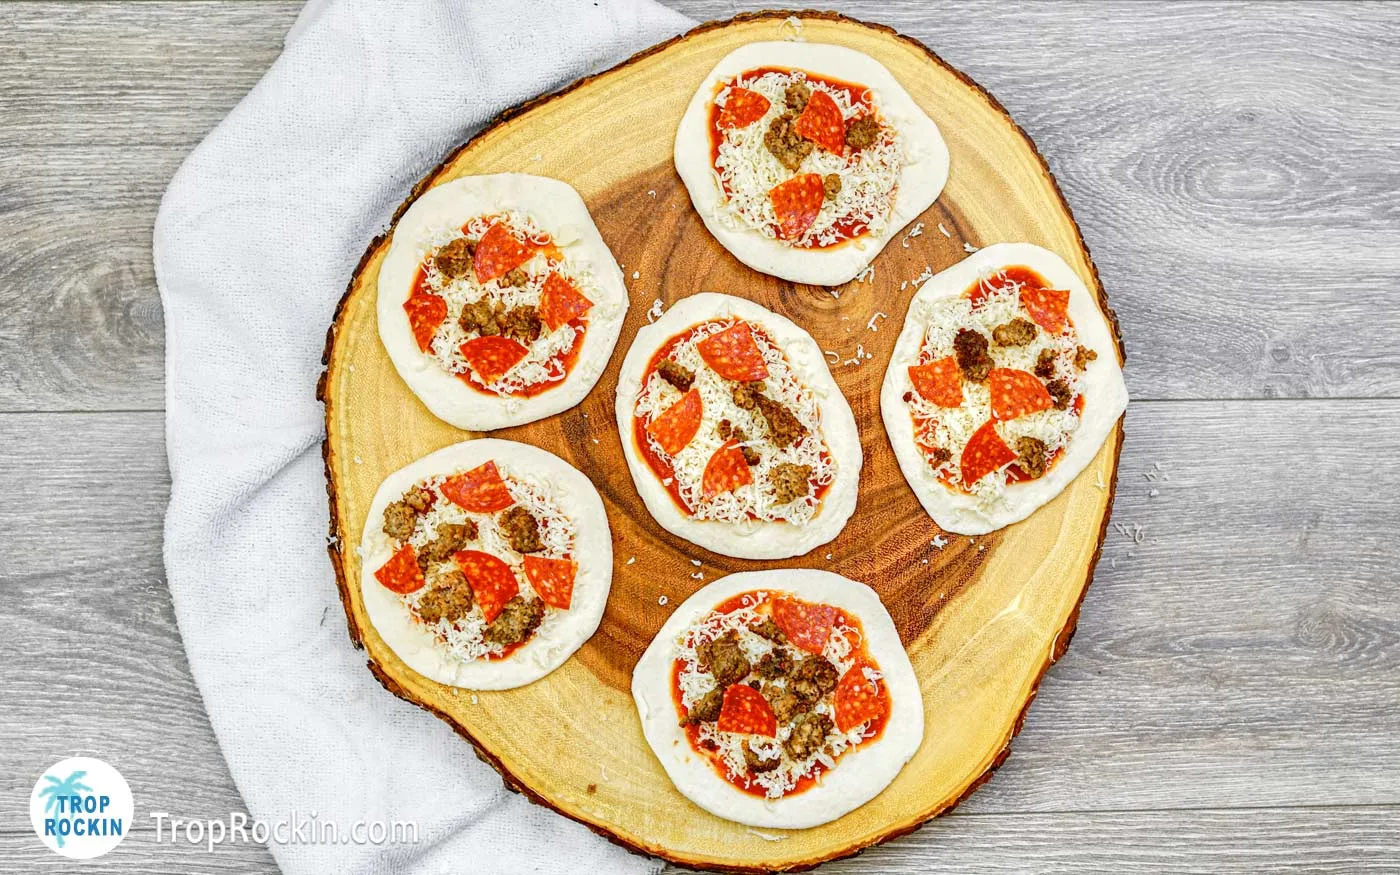 Six mini pizzas with added mozzarella cheese, pepperoni and sausage.